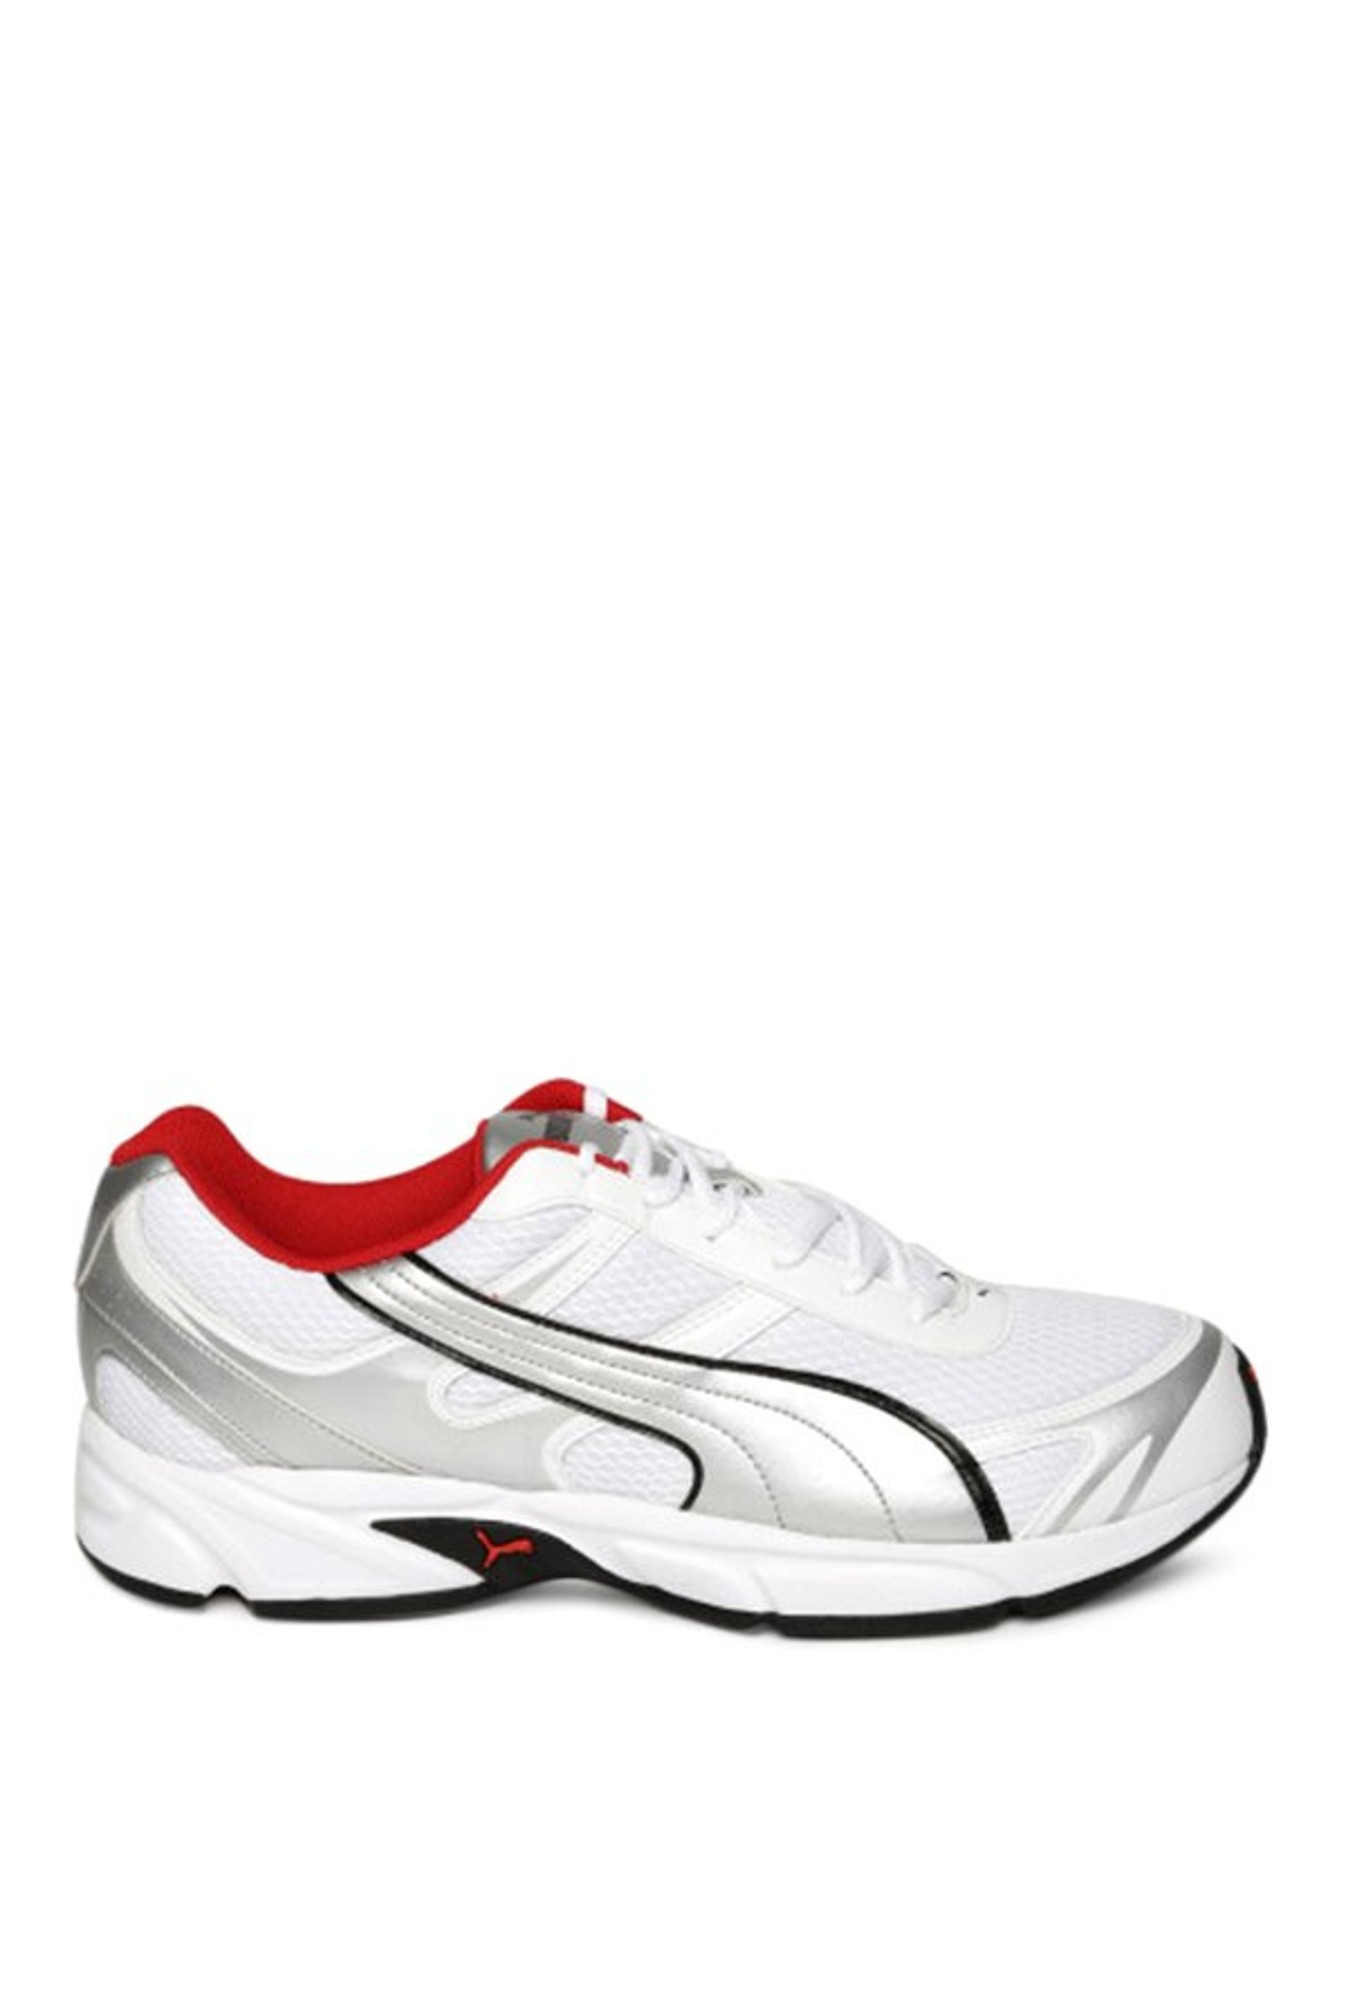 Carlos Ind White \u0026 Silver Running Shoes 